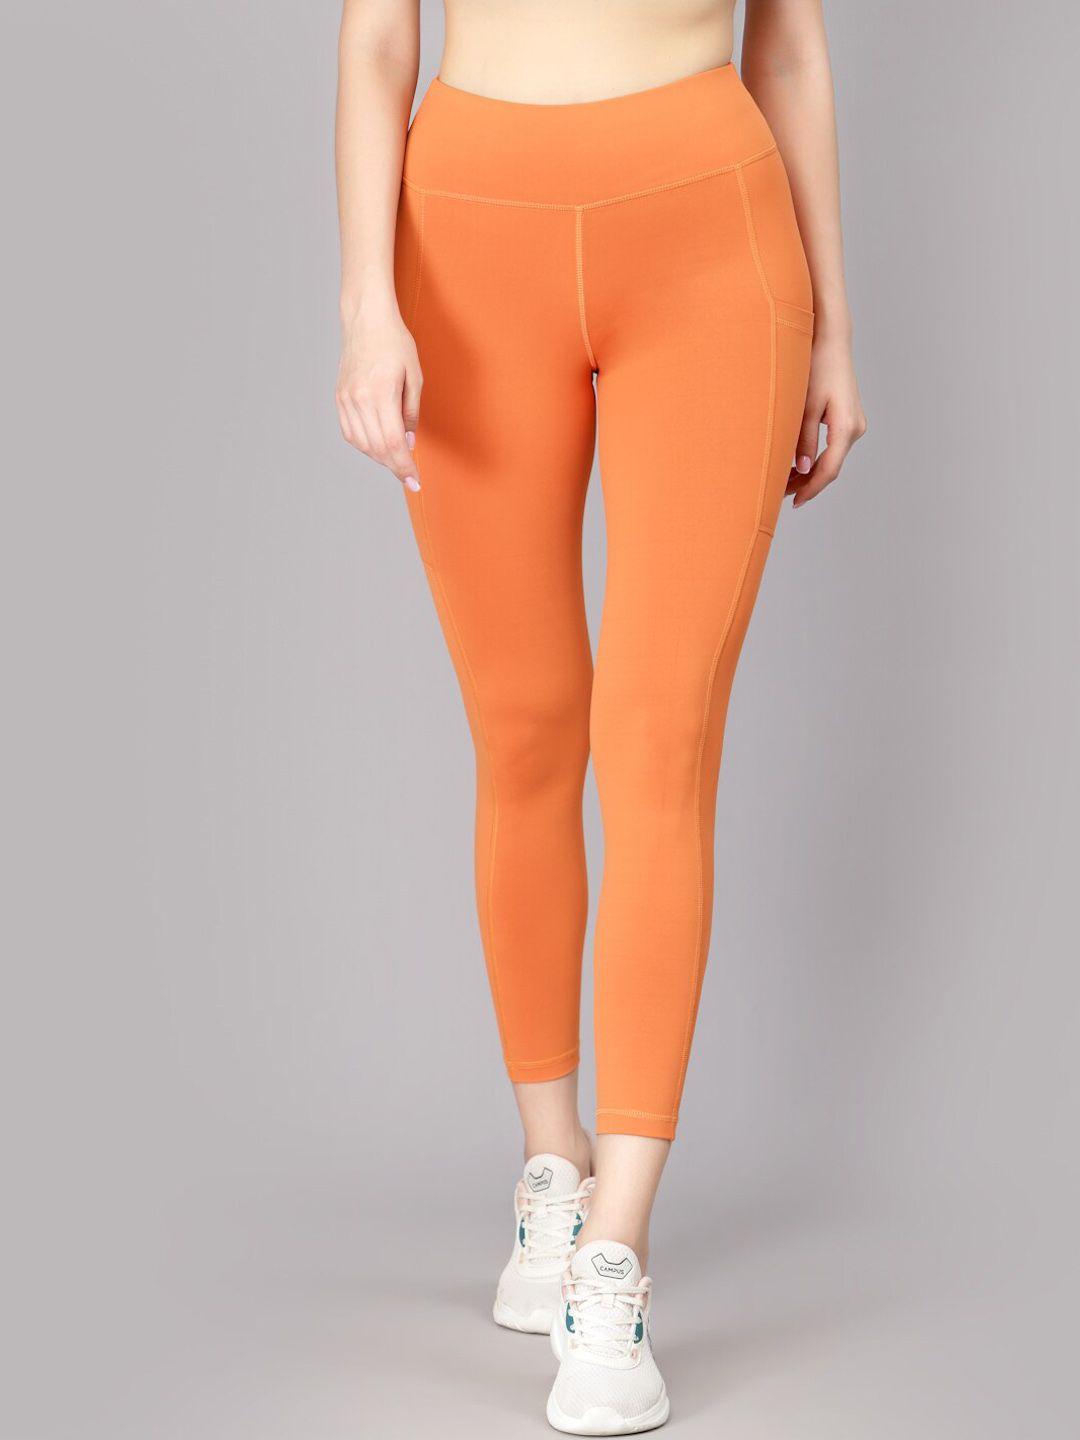 JUMP USA Women Orange Solid Rapid Dry Tights Price in India